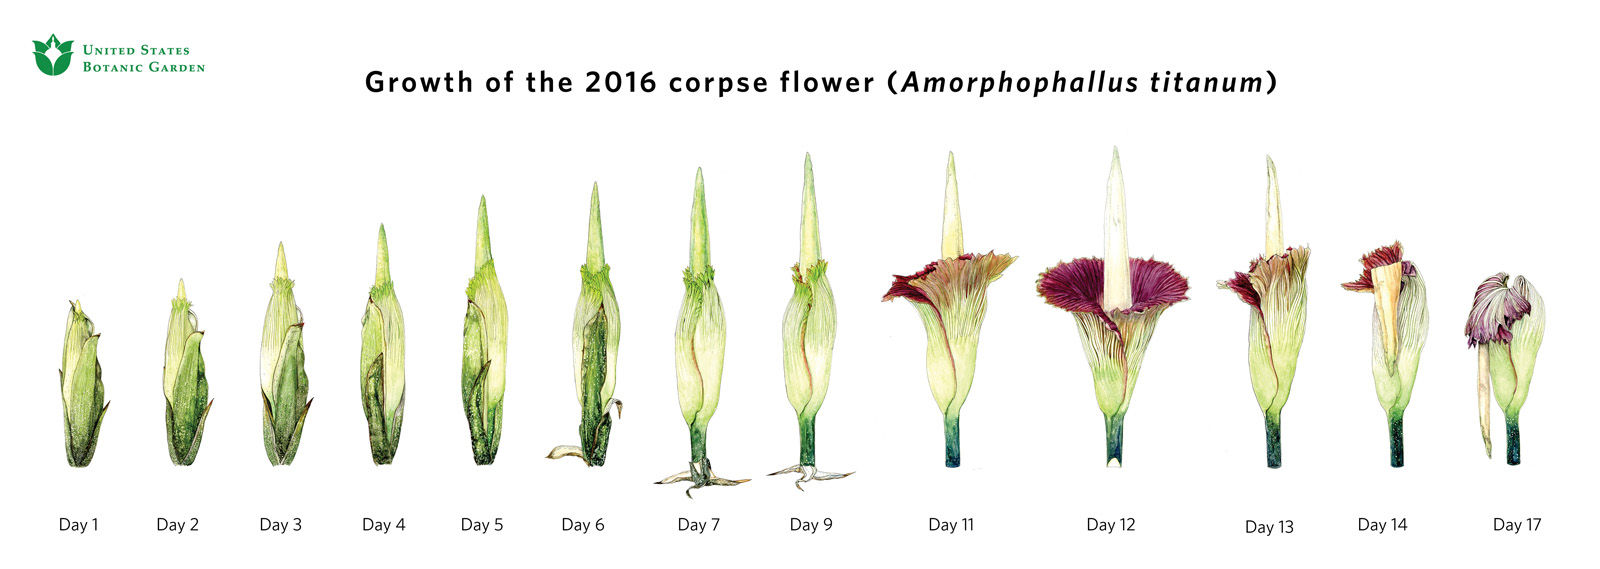 A look at the growth of the 2016 corpse flower. (Courtesy U.S. Botanic Garden)